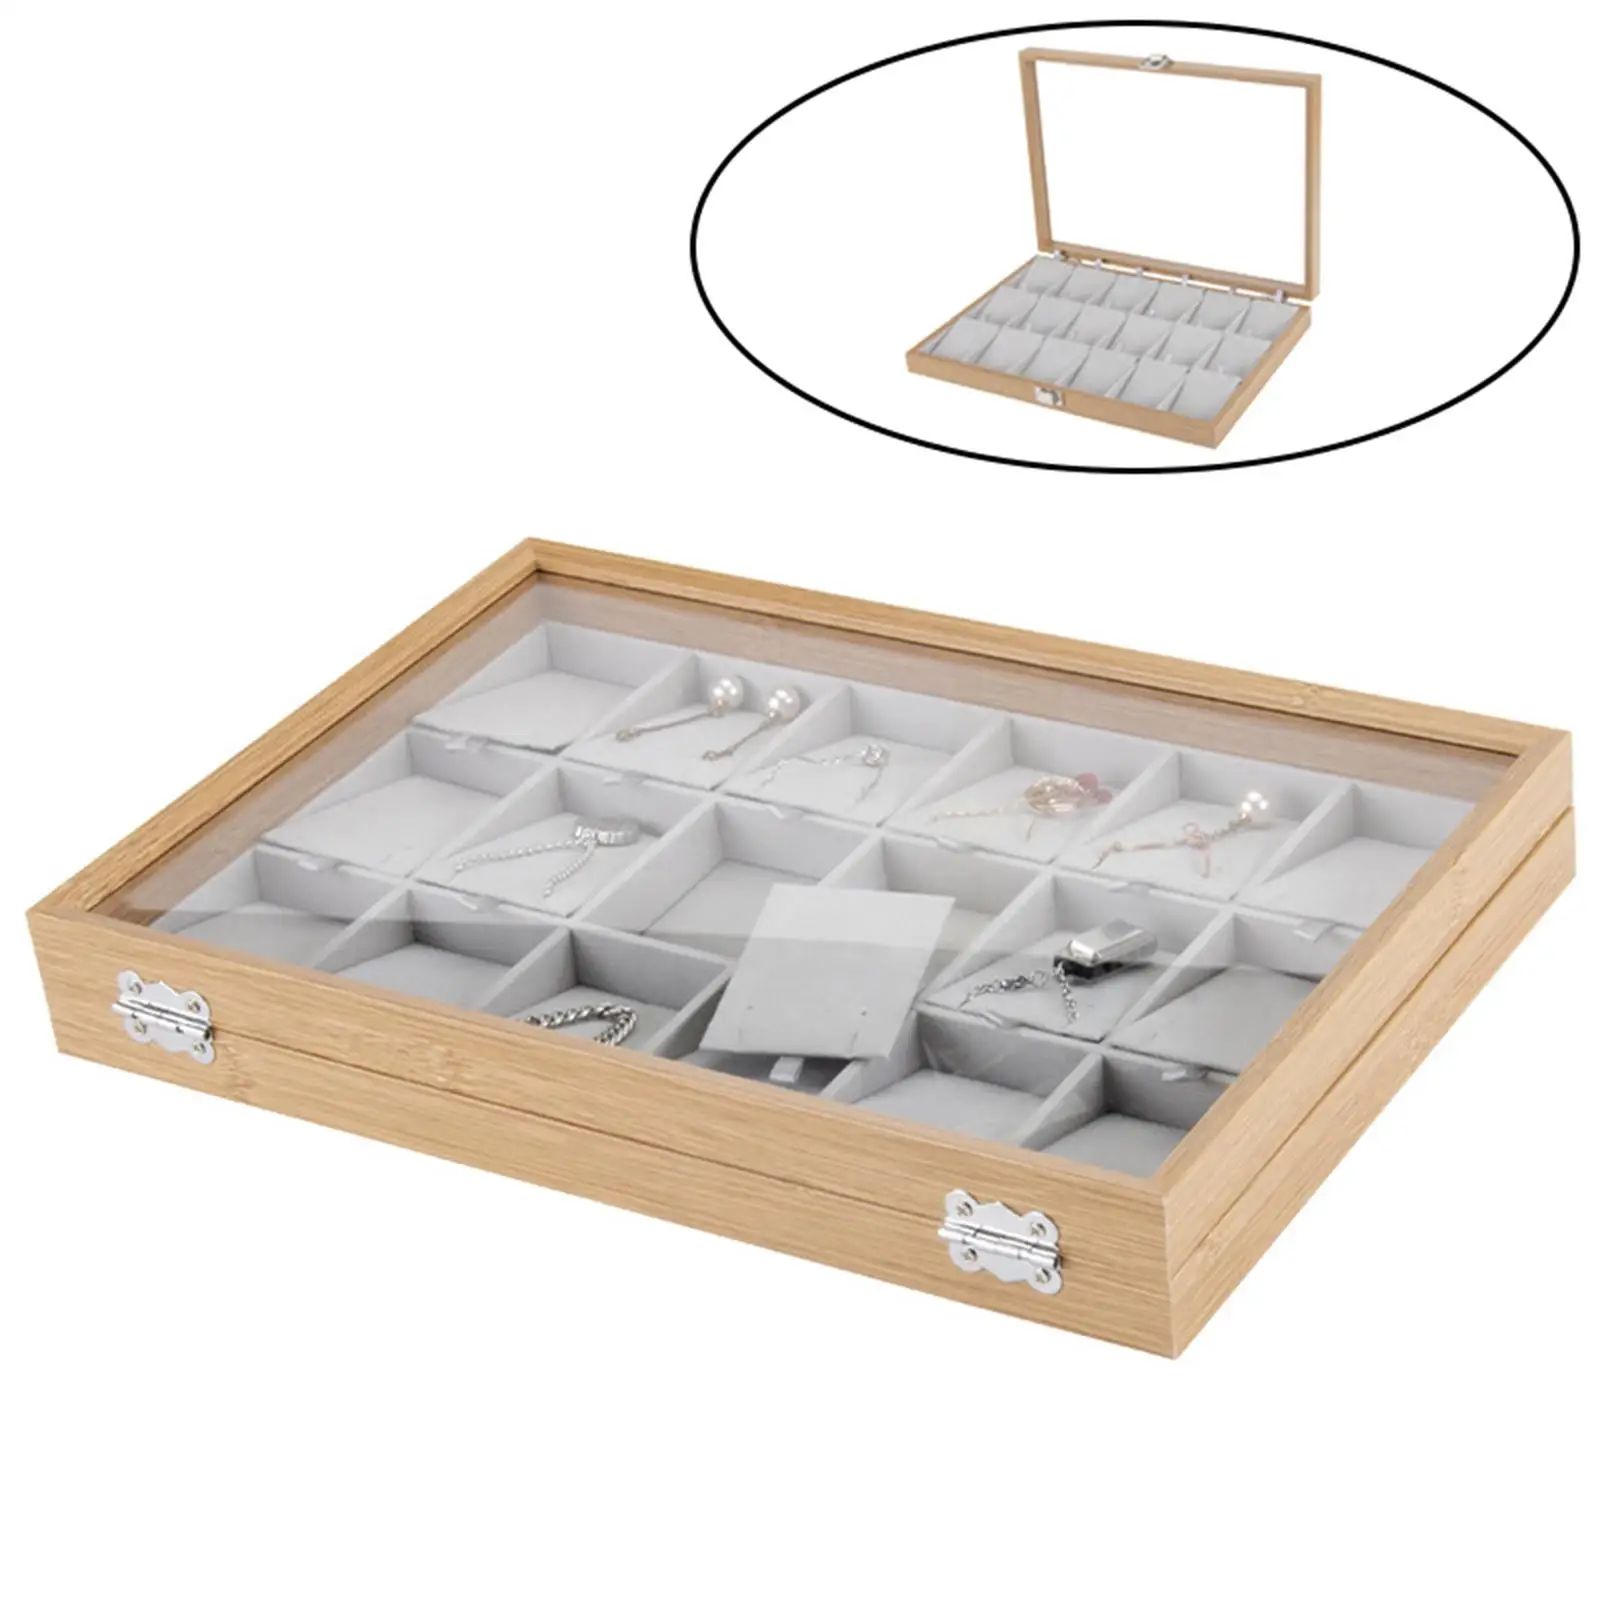 18 Grids Earrings Necklace Jewelry Display Storage Organizer Tray Holder